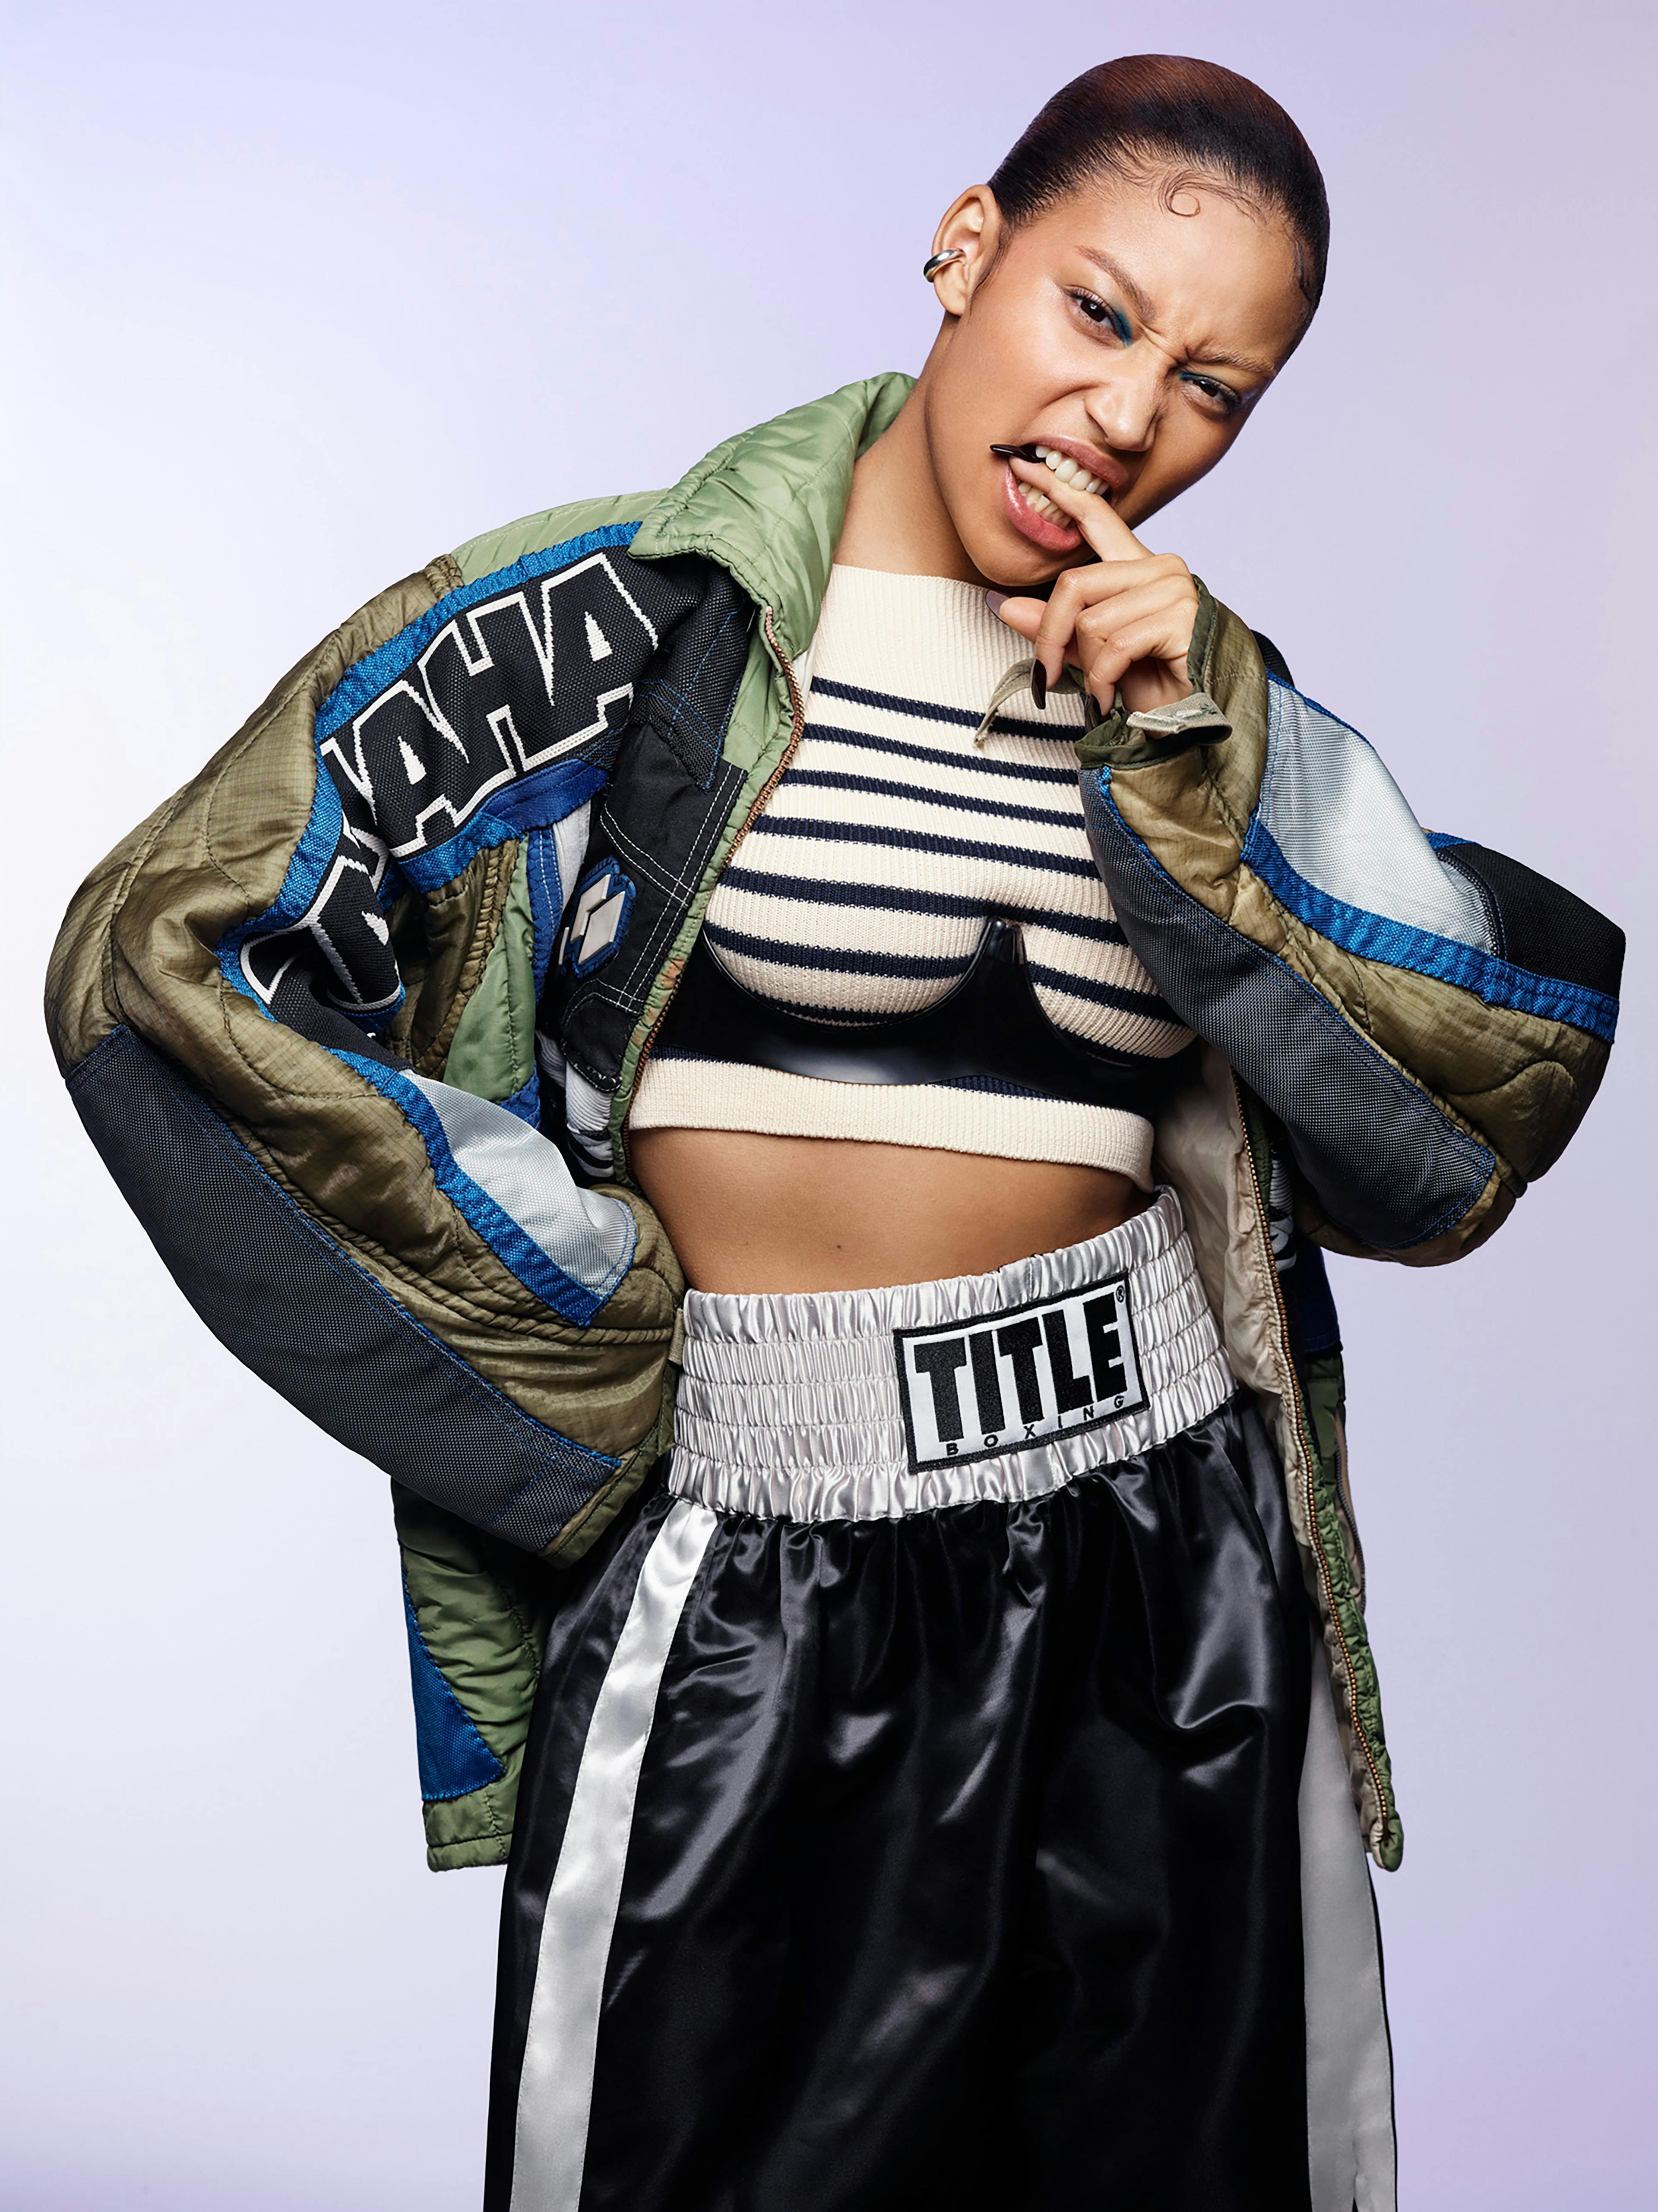 Jacket by Courtney MC. Bra by Atusko Kudo. Vintage top by Jean Paul Gaultier from the Albright Fashion Library. Vintage shorts by Title Boxing from the David Casavant Archive. Ear cuff by All Blues.